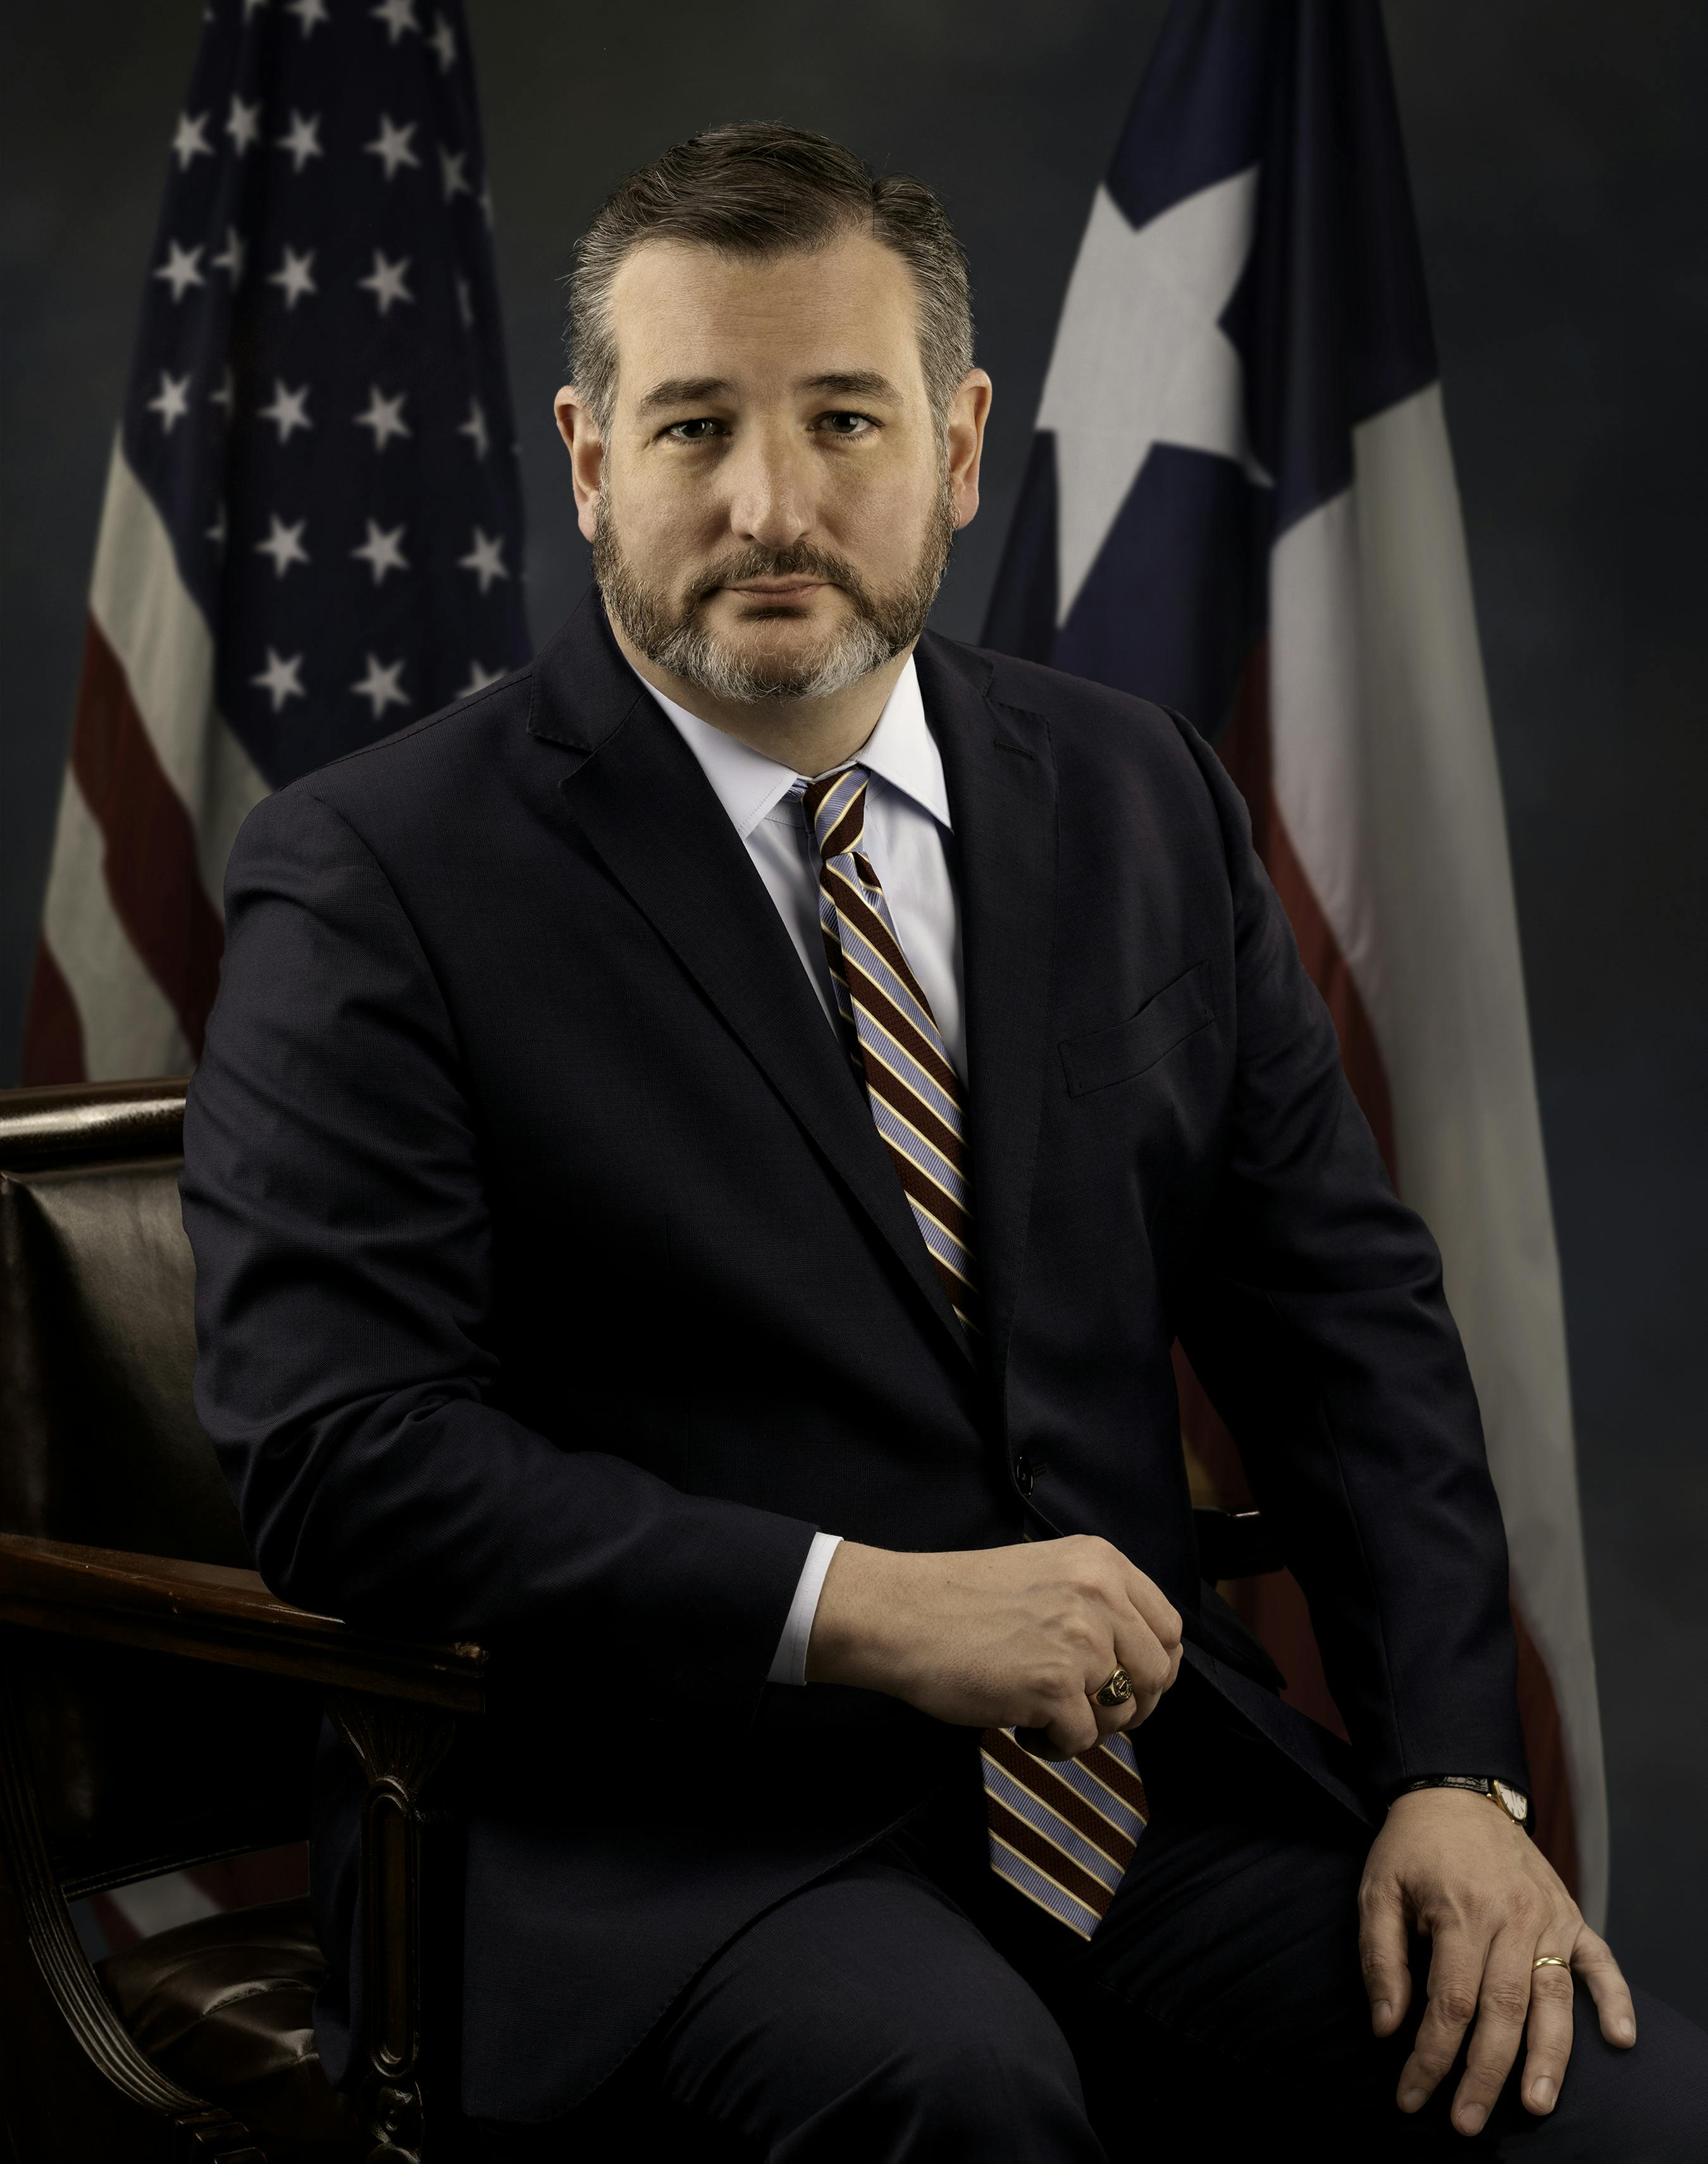 Profile picture of Ted Cruz